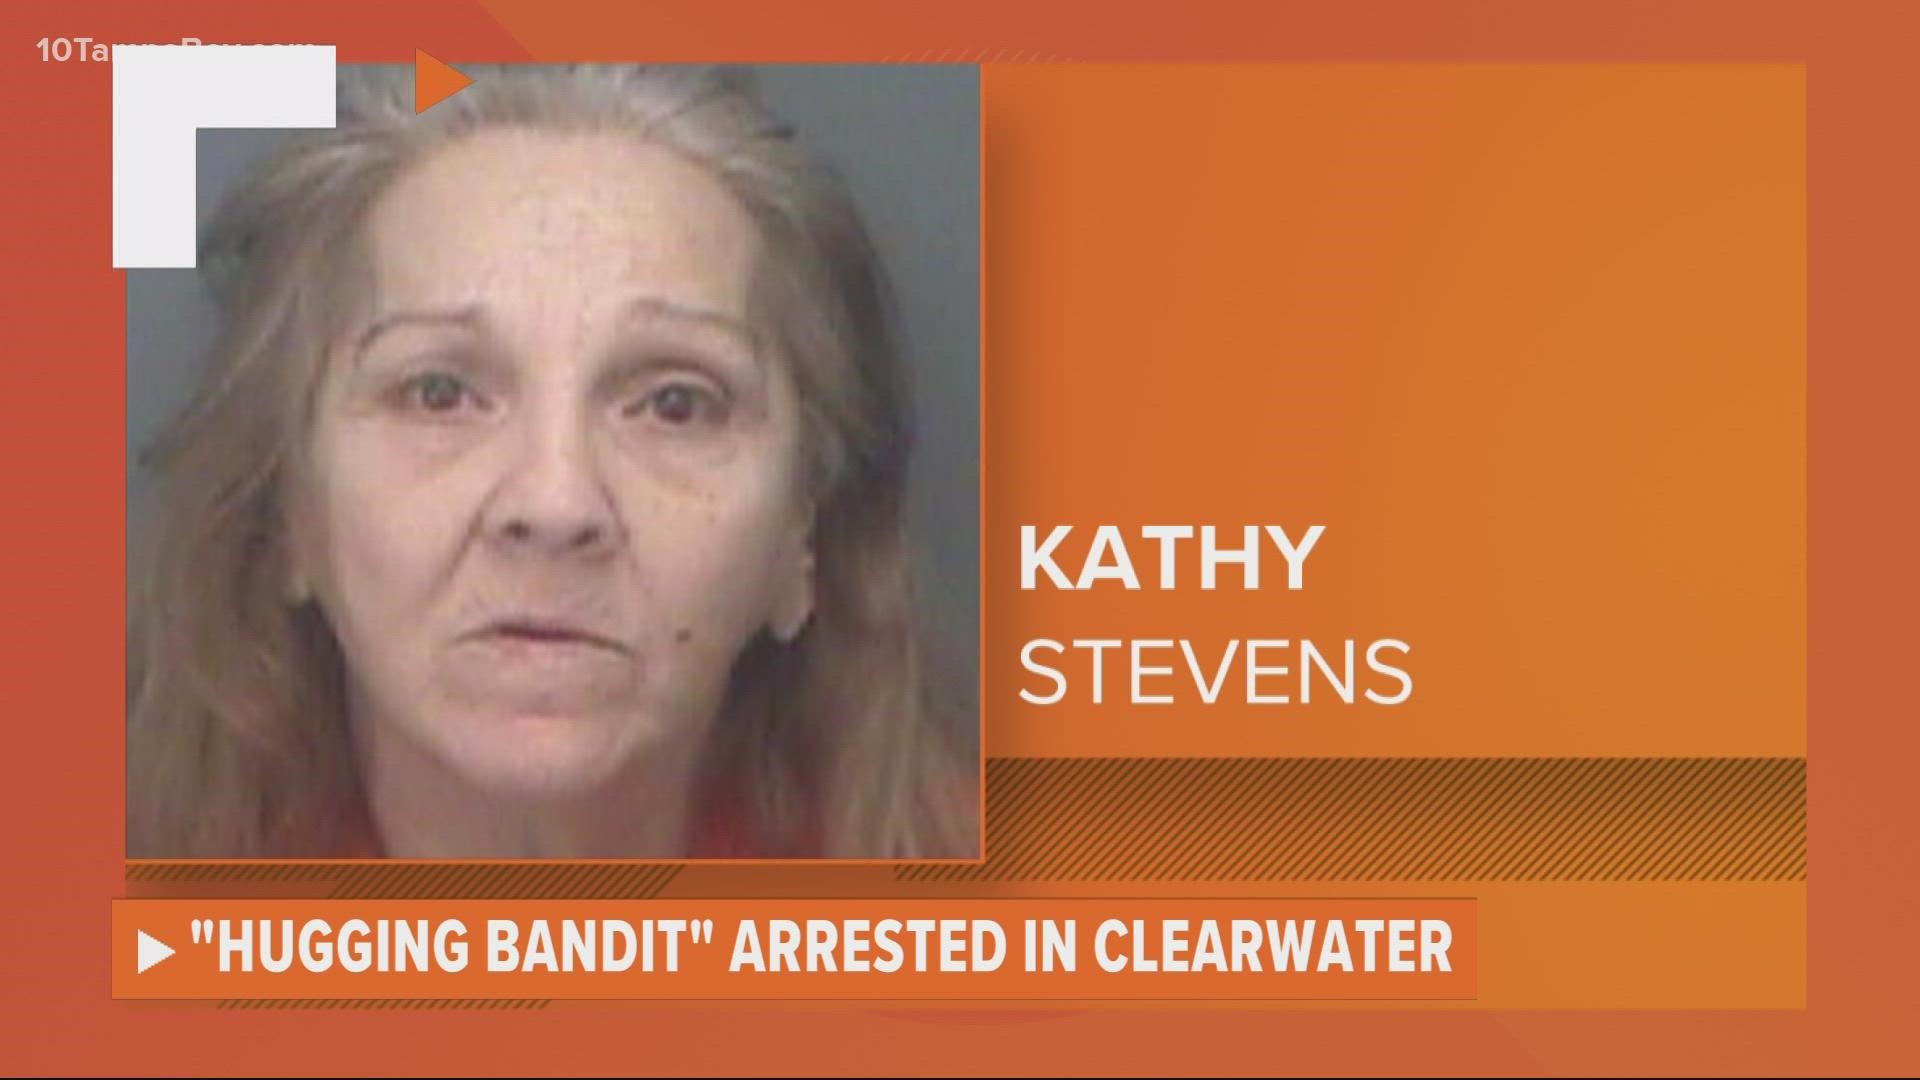 65-year-old Kathy Stevens faces more than a dozen charges.